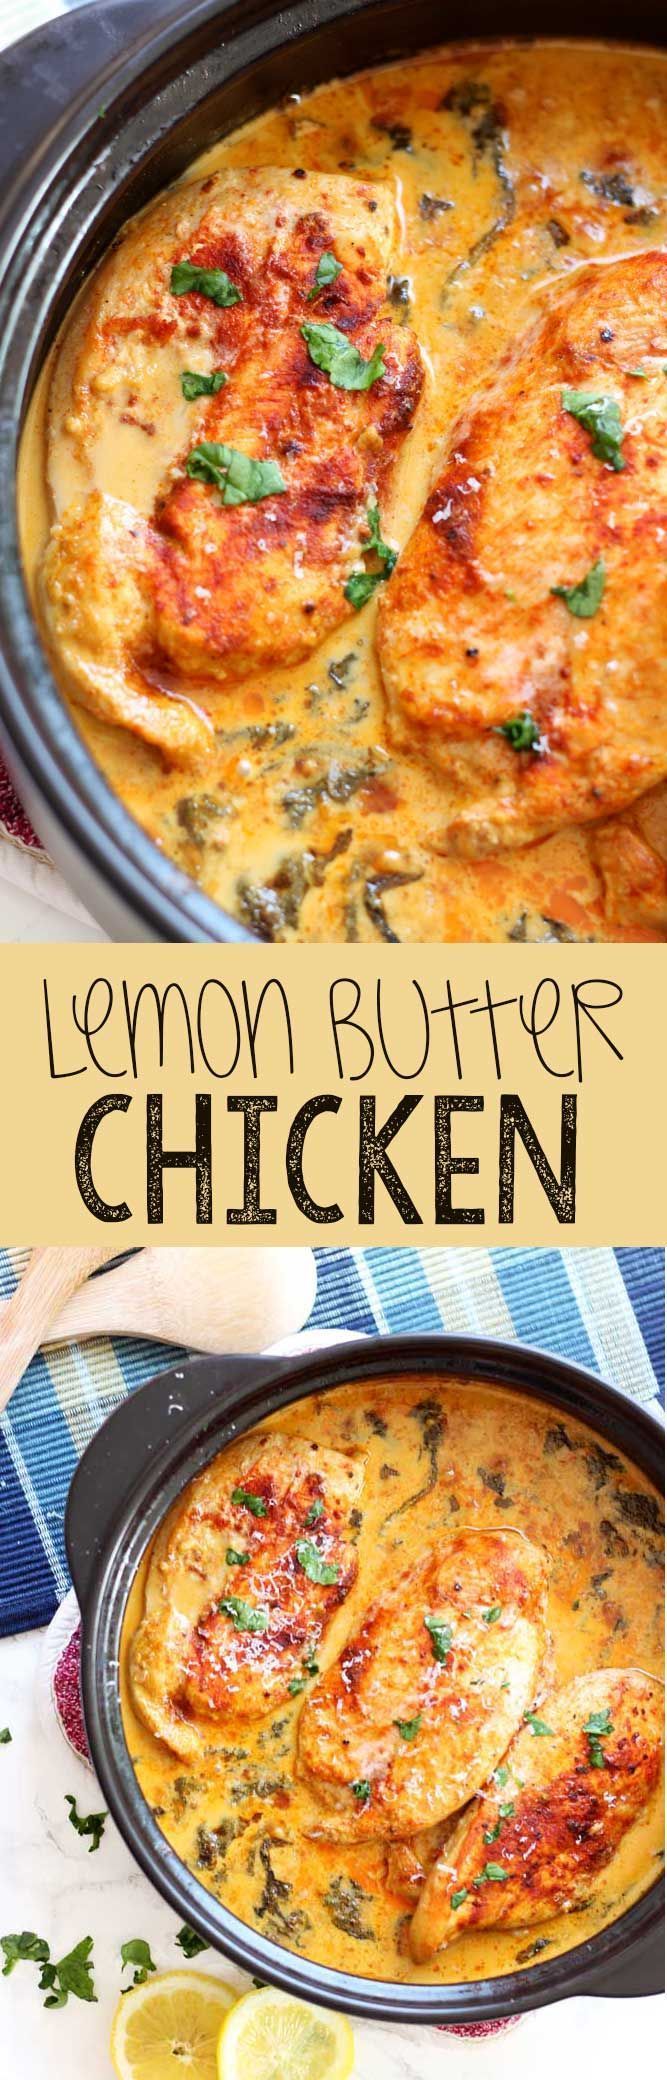 Easy chicken dinner, this lemon butter chicken is savory, mouthwatering, and easy to get on the table